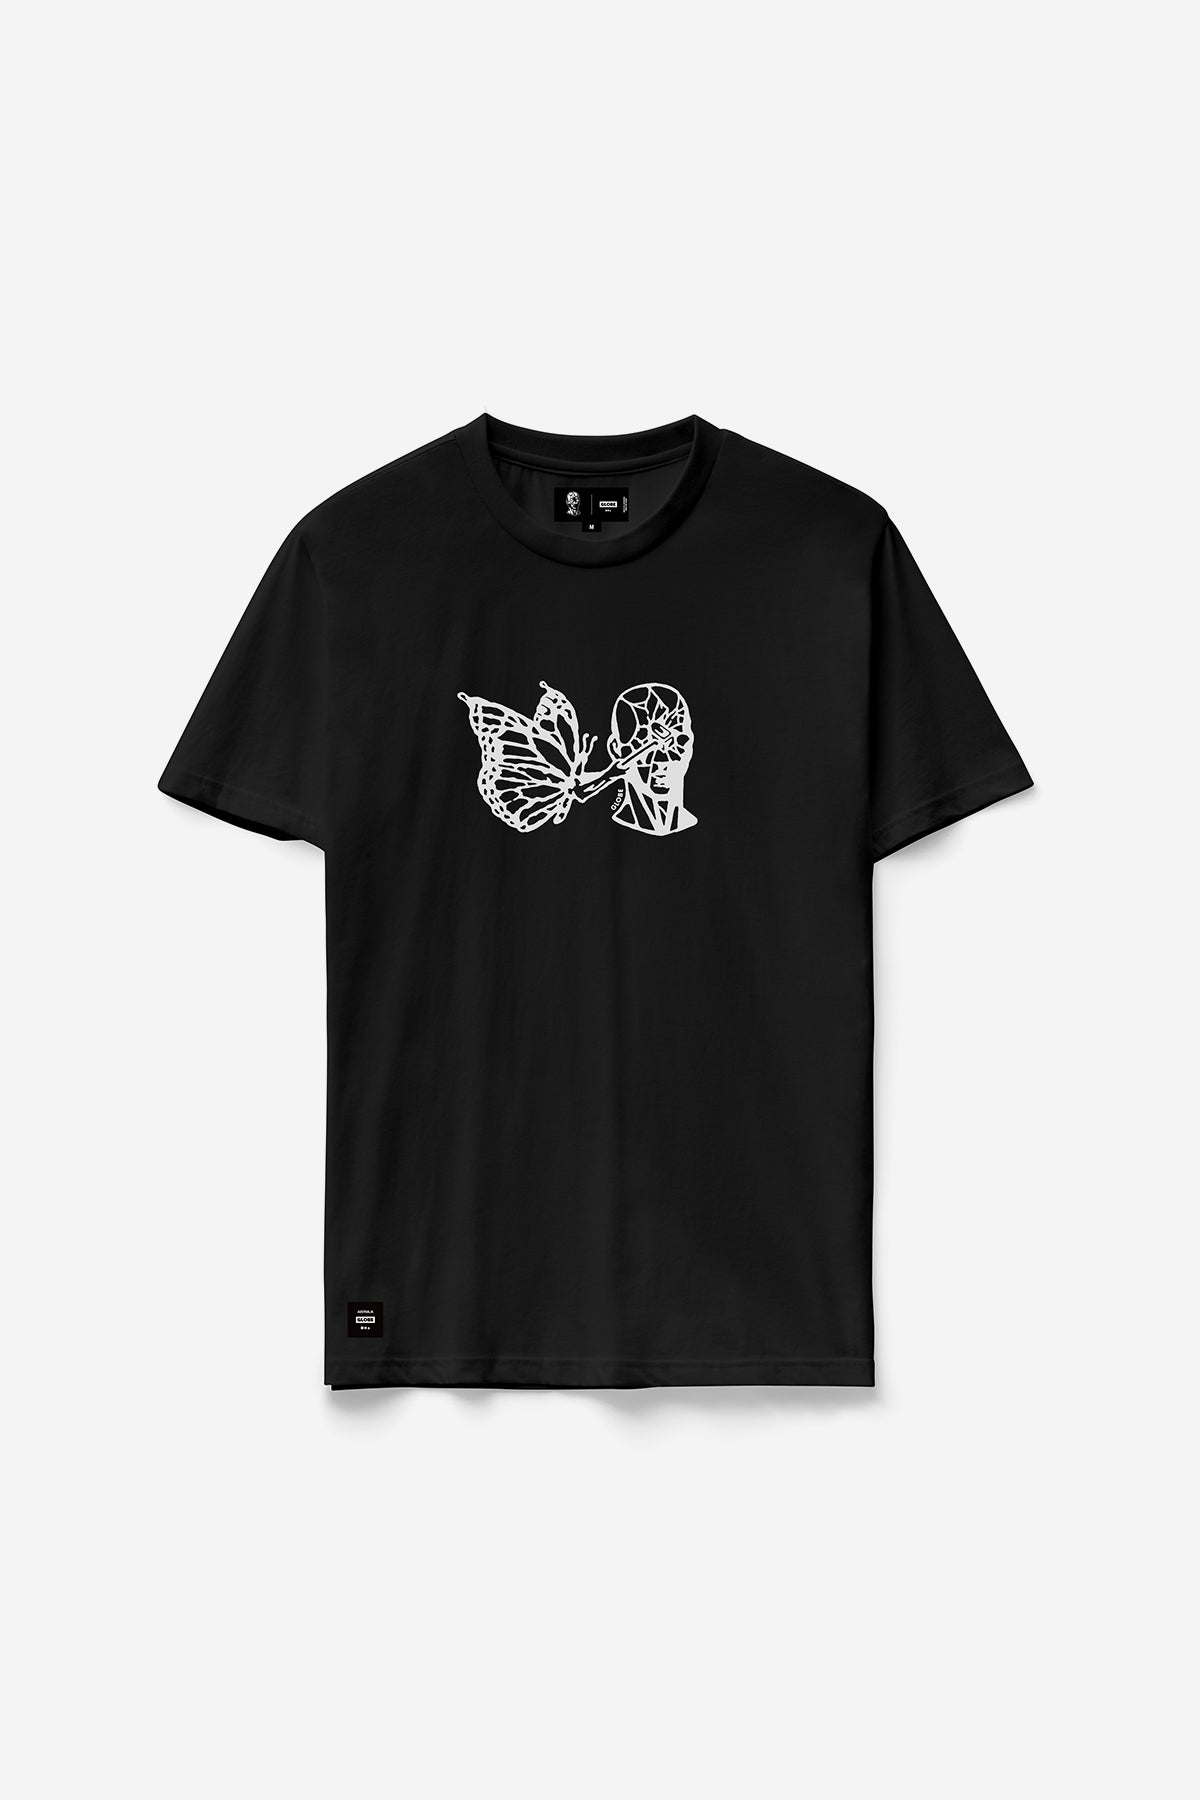 off body Smashed Tee